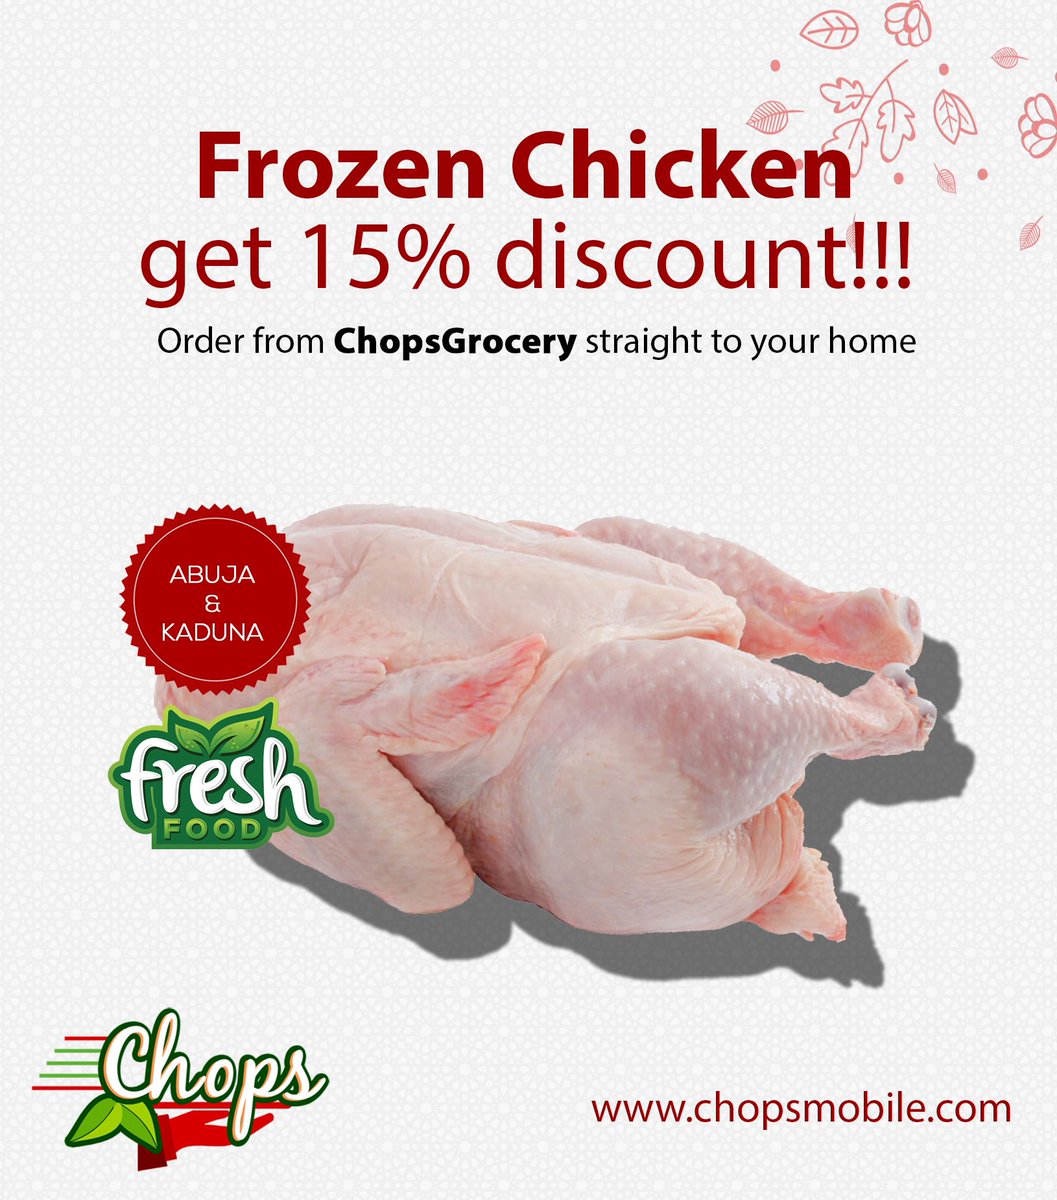 Craving some juicy chicken? Order frozen chicken through the Chopsmobile app and get it delivered right to your doorstep! It's quick, easy, and delicious! #Chopsmobile #FrozenChicken #ConvenientEating